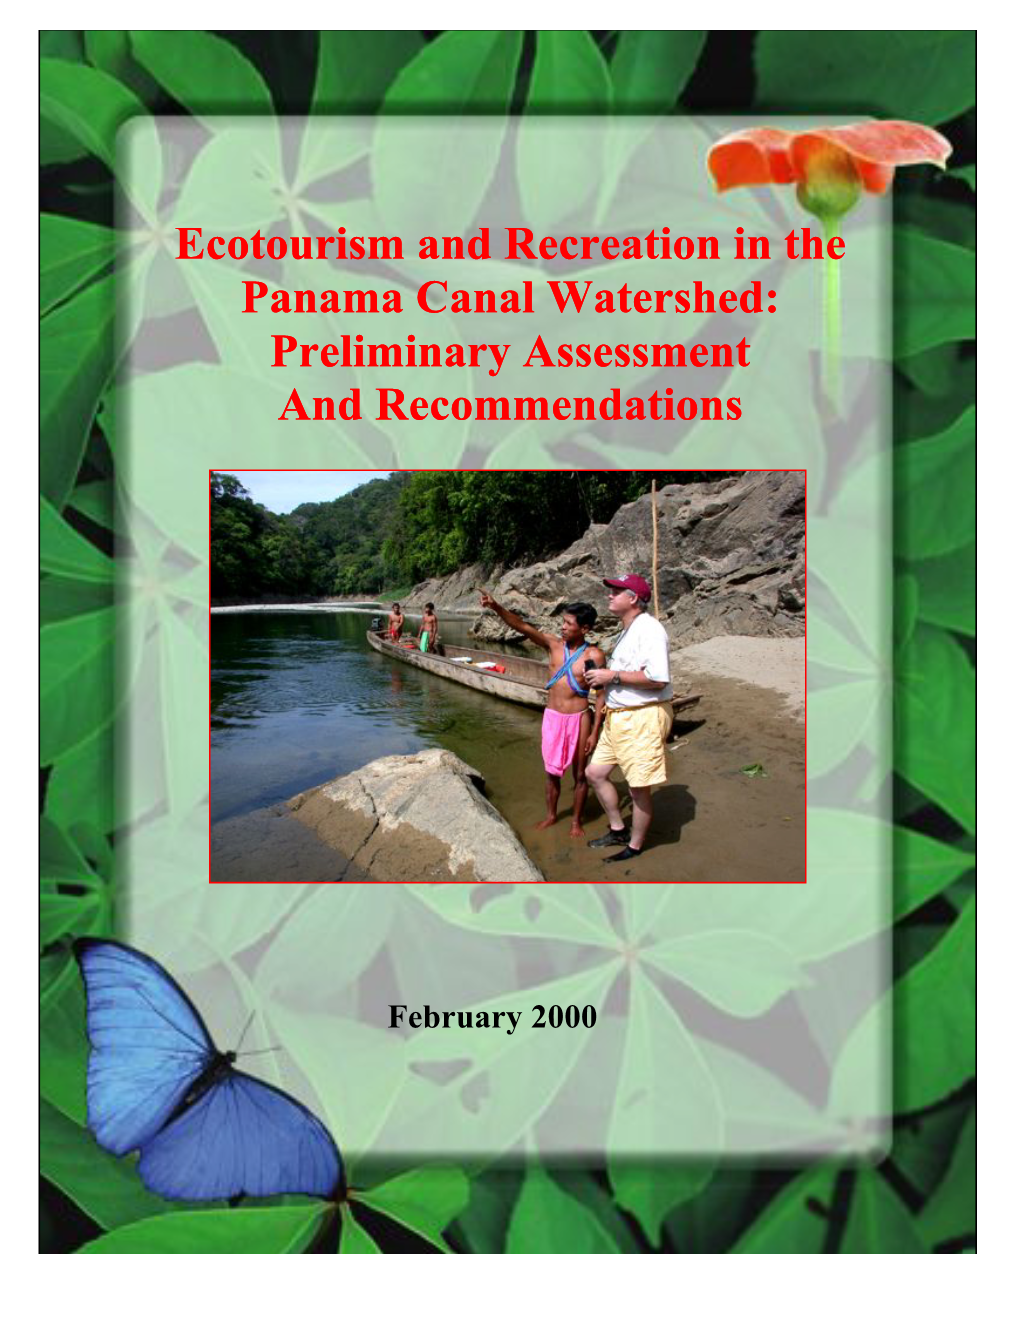 Ecotourism and Recreation in the Panama Canal Watershed: Preliminary Assessment and Recommendations